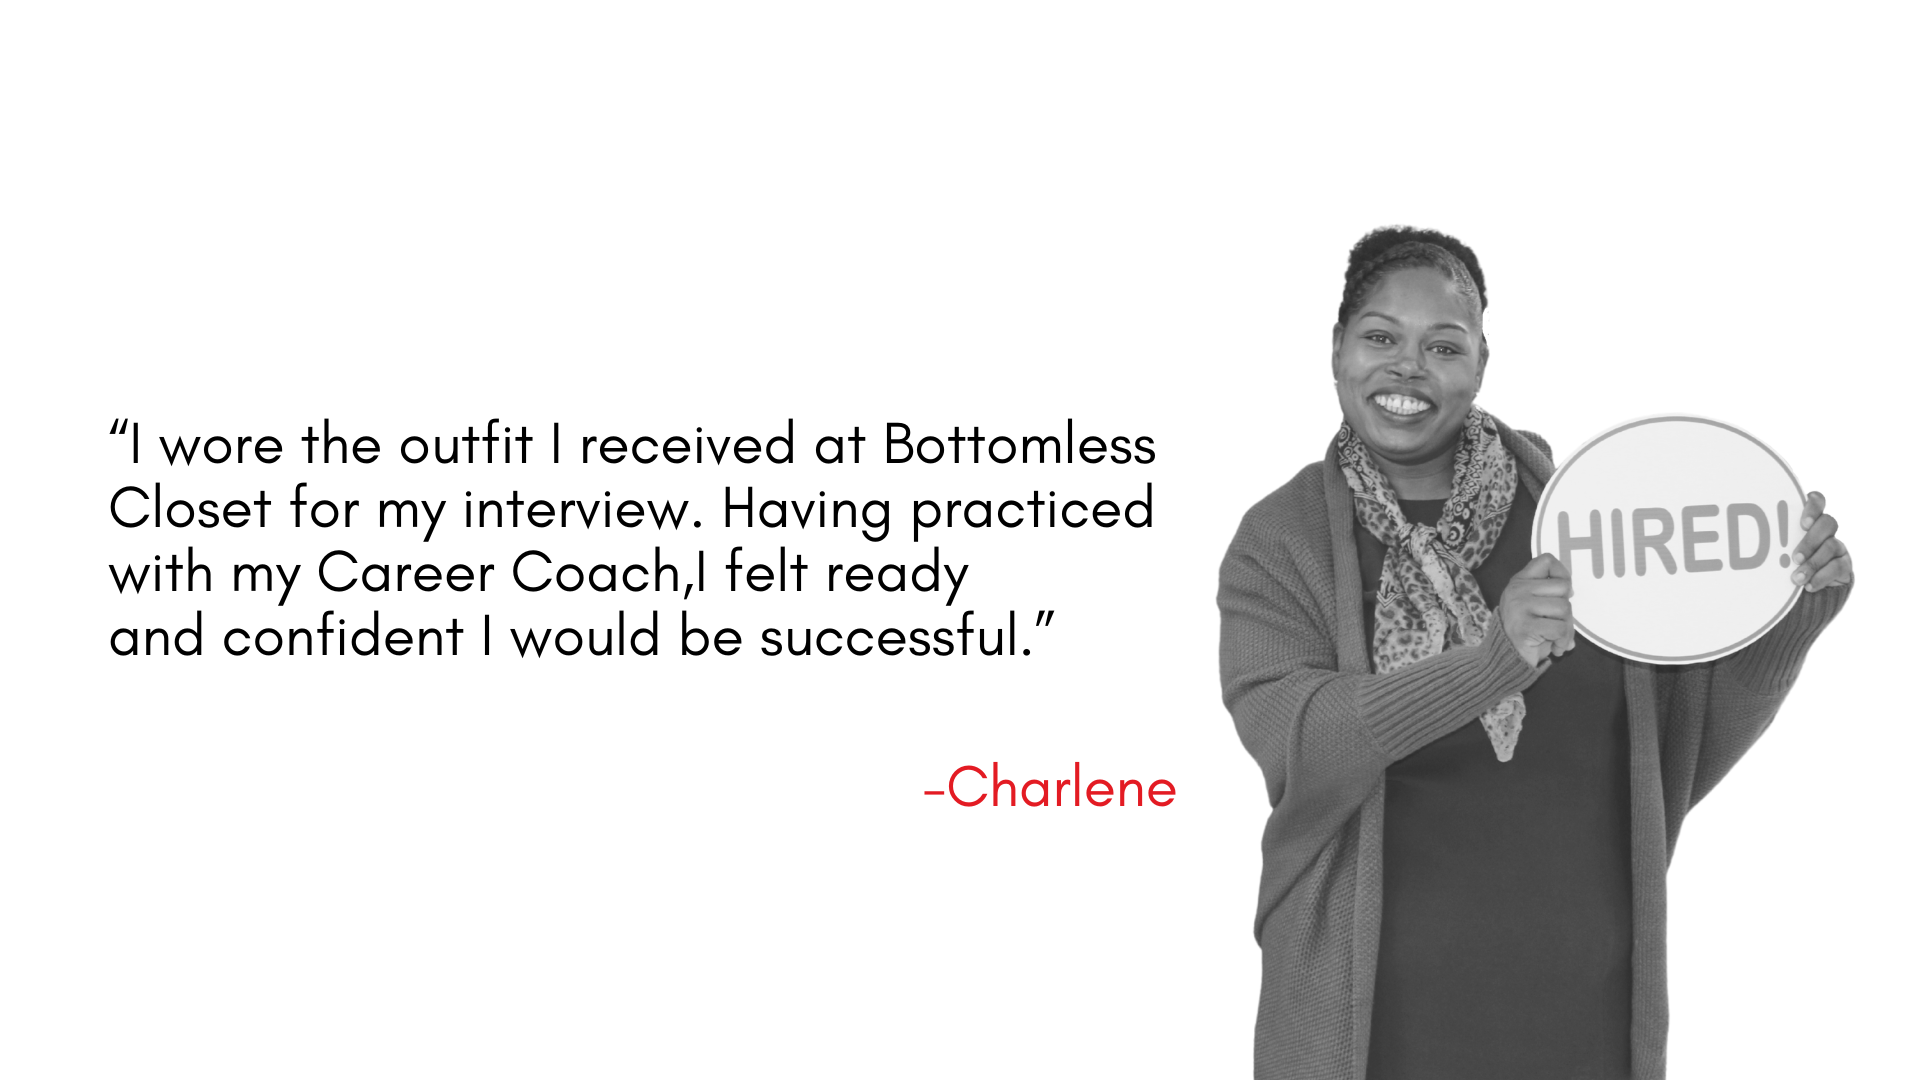 “I wore the outfit I received at Bottomless Closet for my interview. Having practiced with my Career Coach,I felt ready and confident I would be successful.”